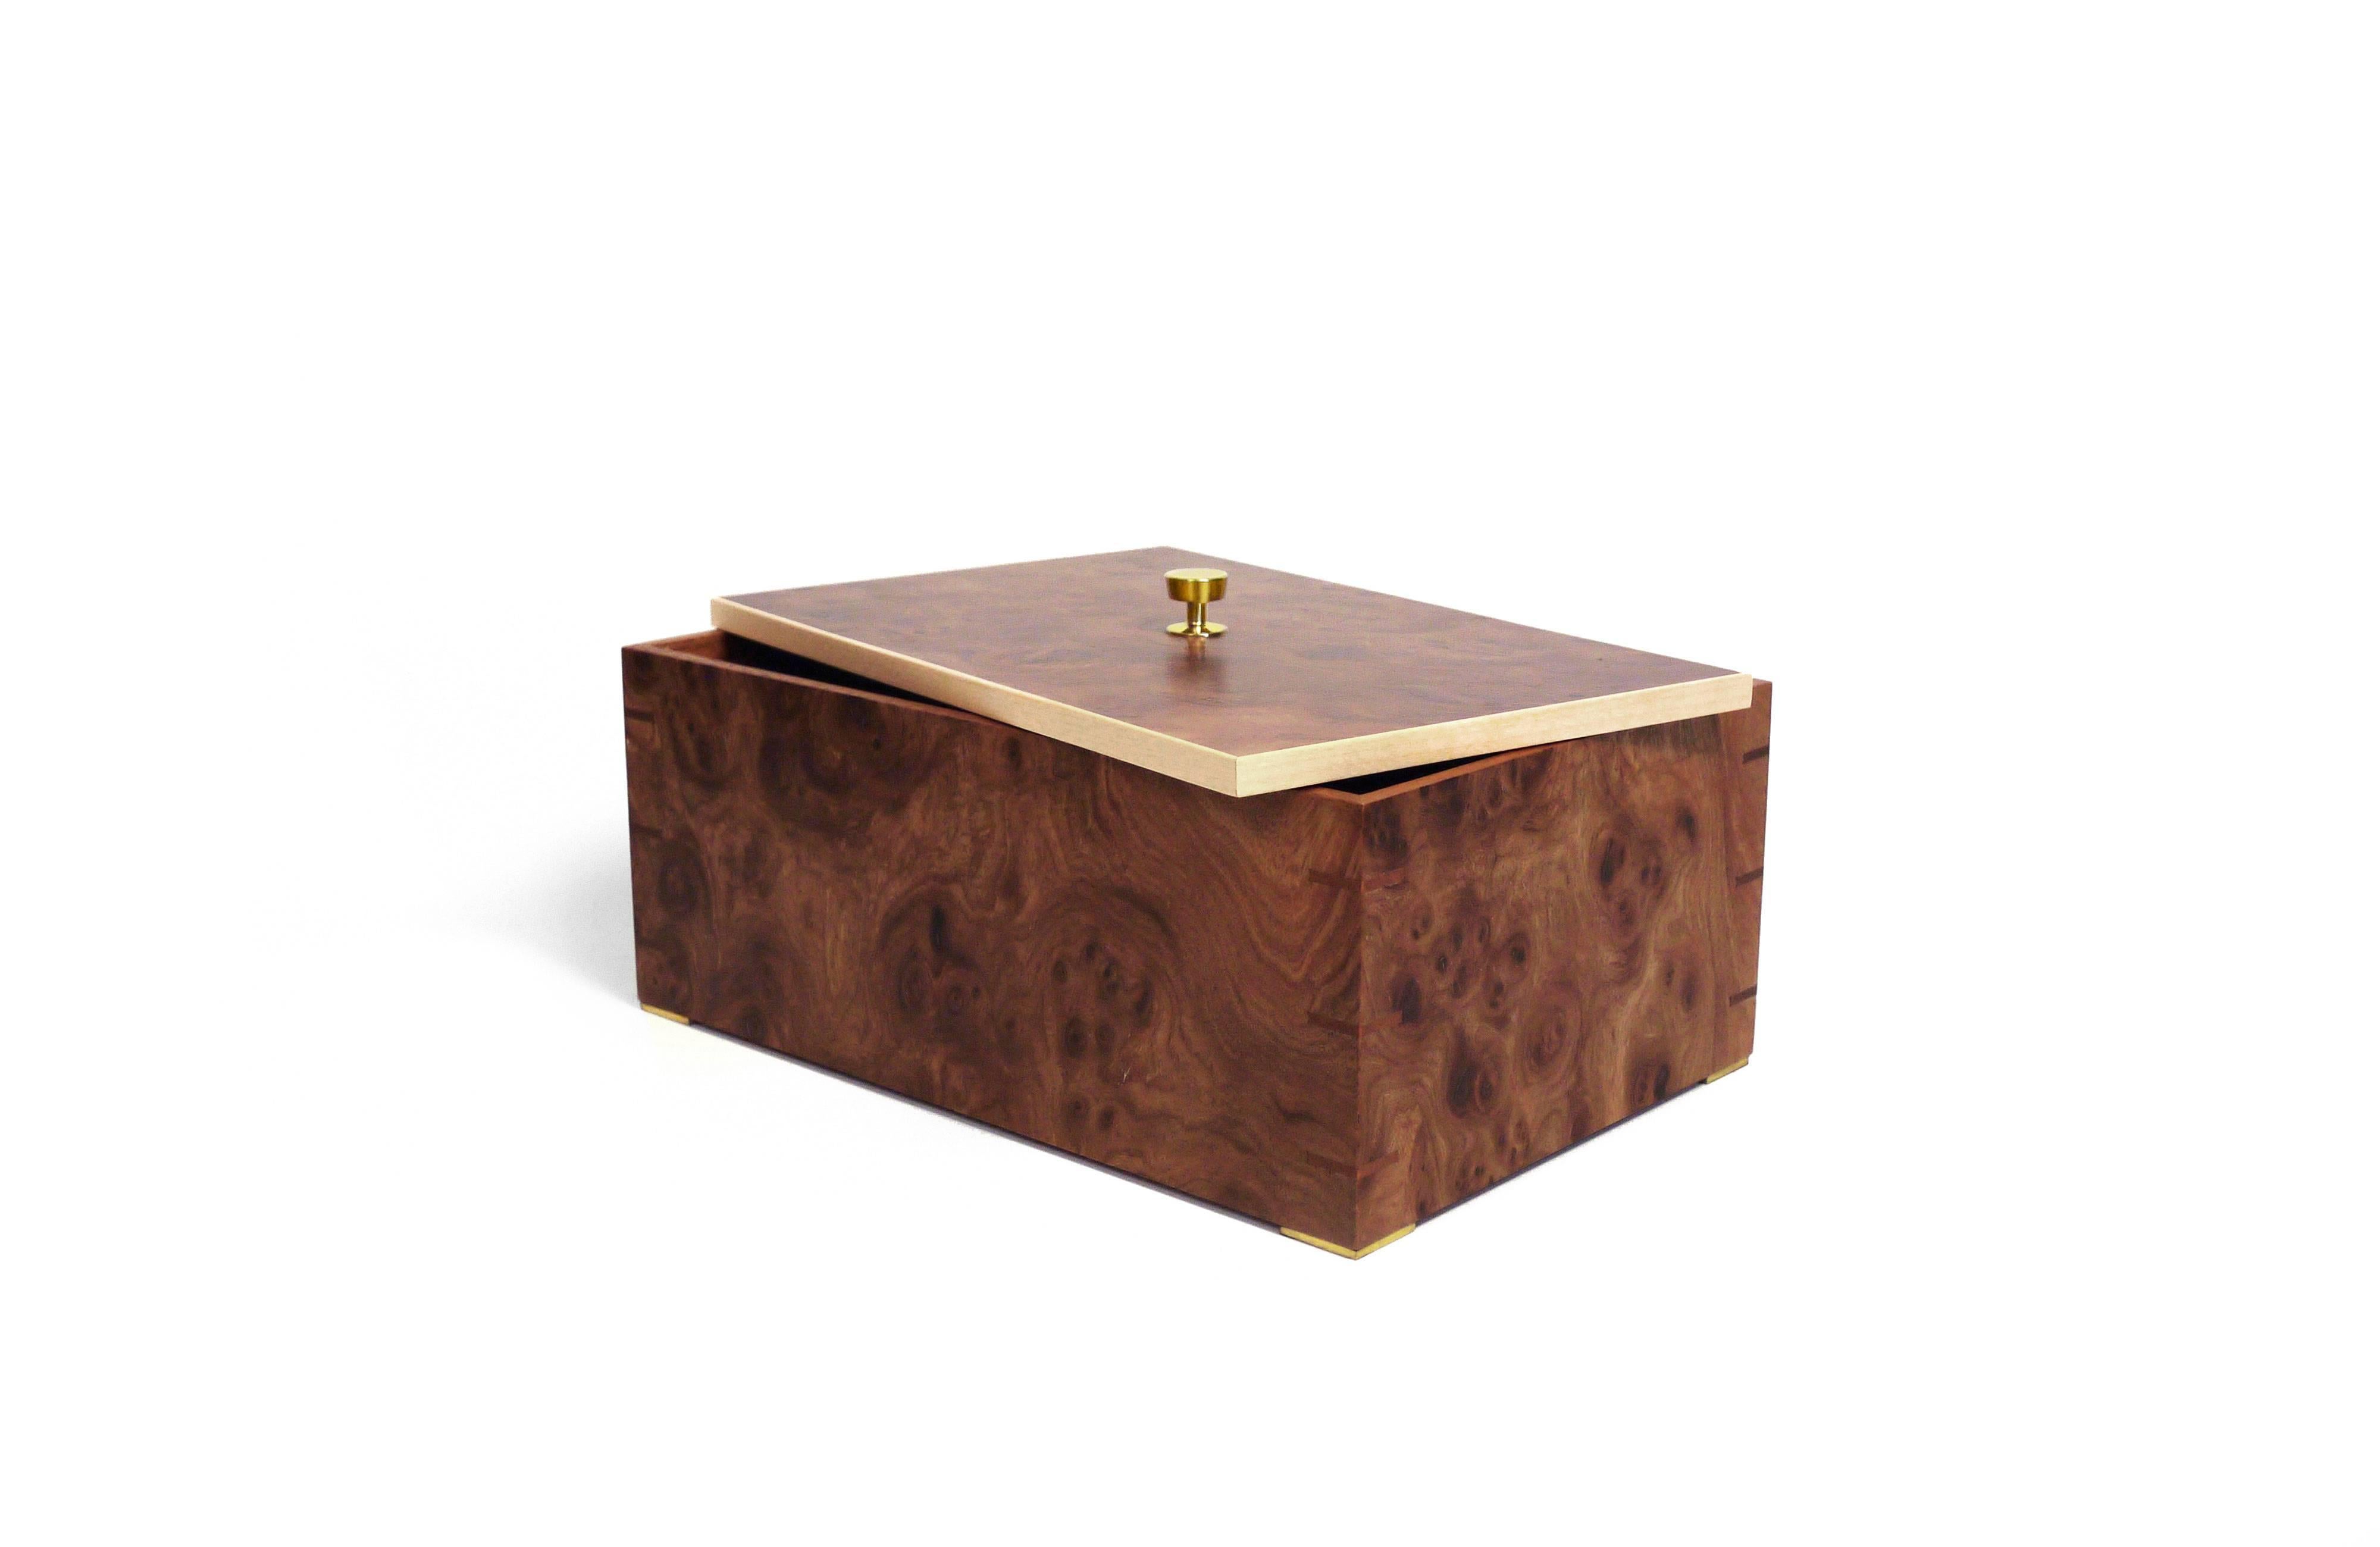 Part of Les Few's LaMiel collection, this contemporary, elmroot, mahogany and brass, modern, minimalist wood box with birch details, is made by artisans in Sweden. The box comes with the choice of a leather interior in granite grey, anthracite,